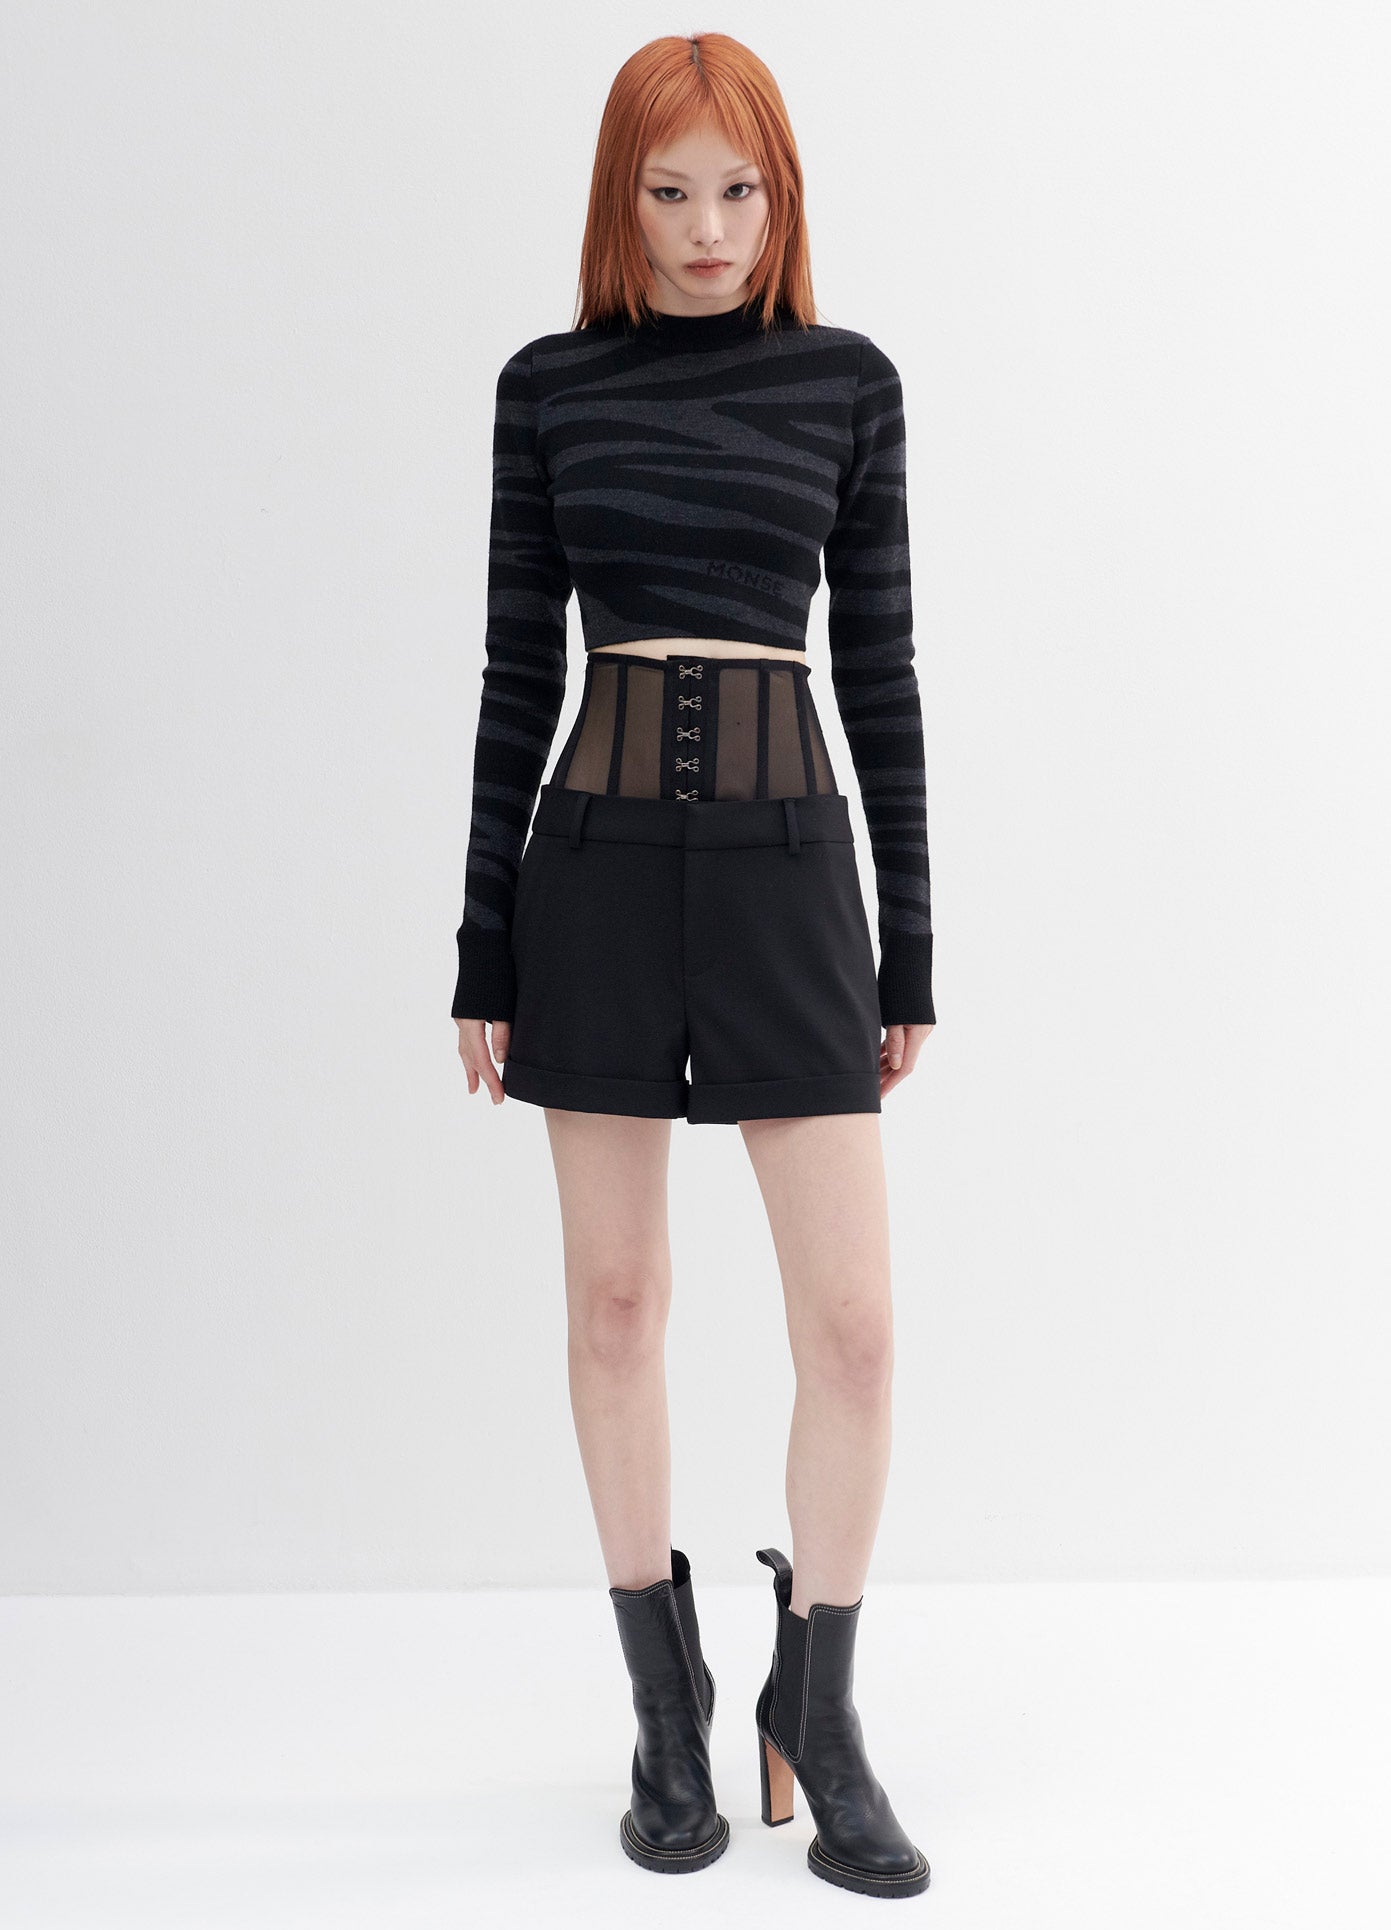 MONSE Zebra Cropped Sweater in Charcoal and Black on Model Full Front View